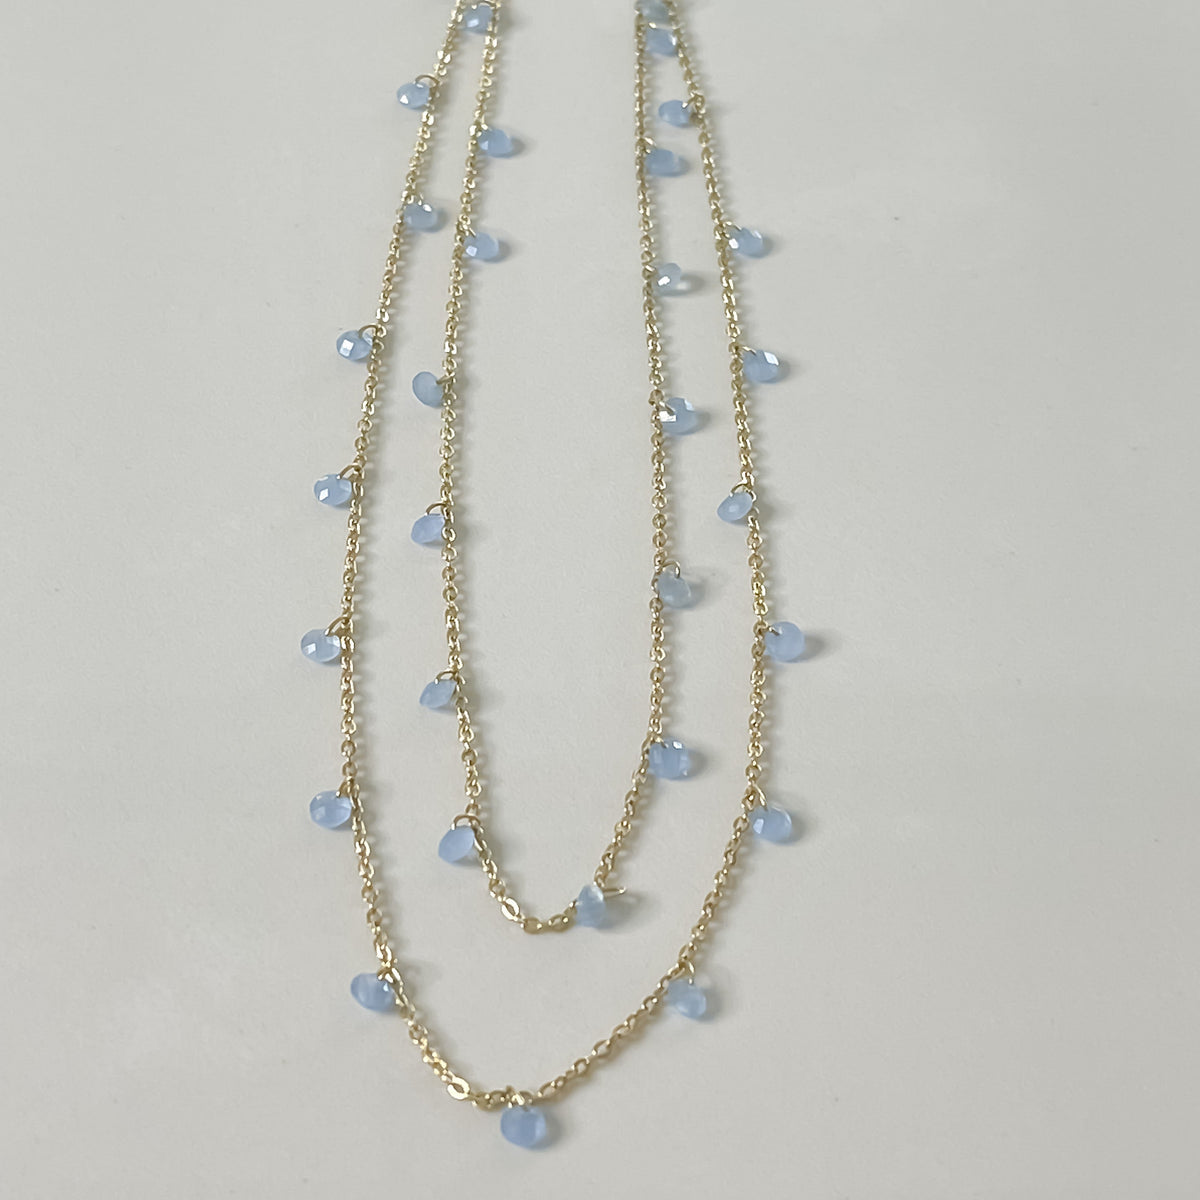 Candy Drops Necklace - Blue Chalcedony